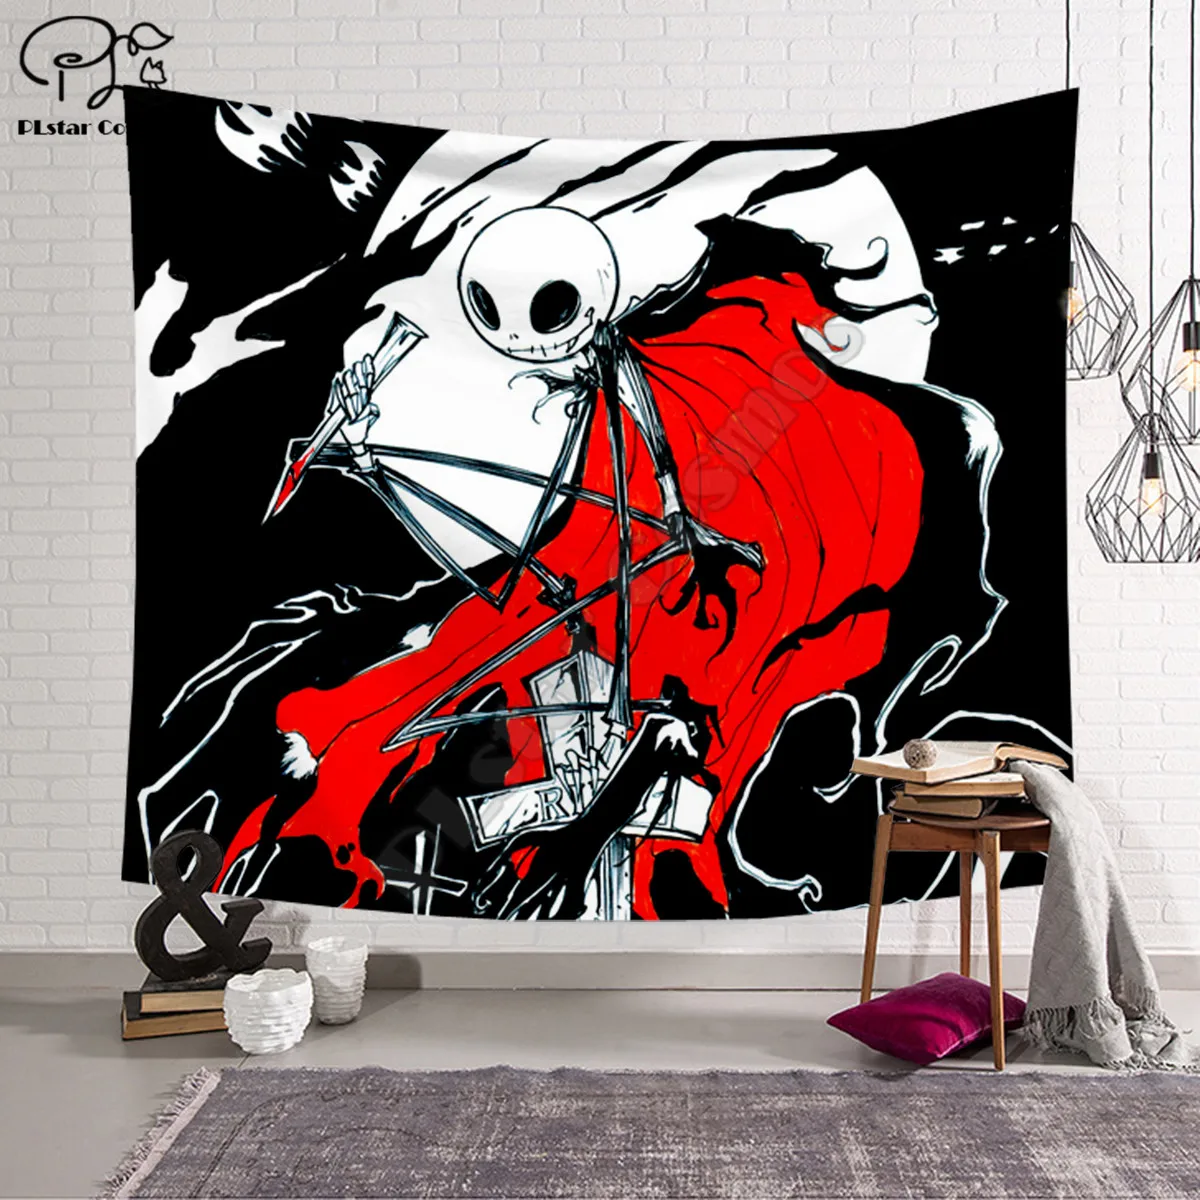 PLstar Cosmos Tapestry The Nightmare Before Christmas 3D Printing Tapestrying  Rectangular Home Decor Wall Hanging style-2